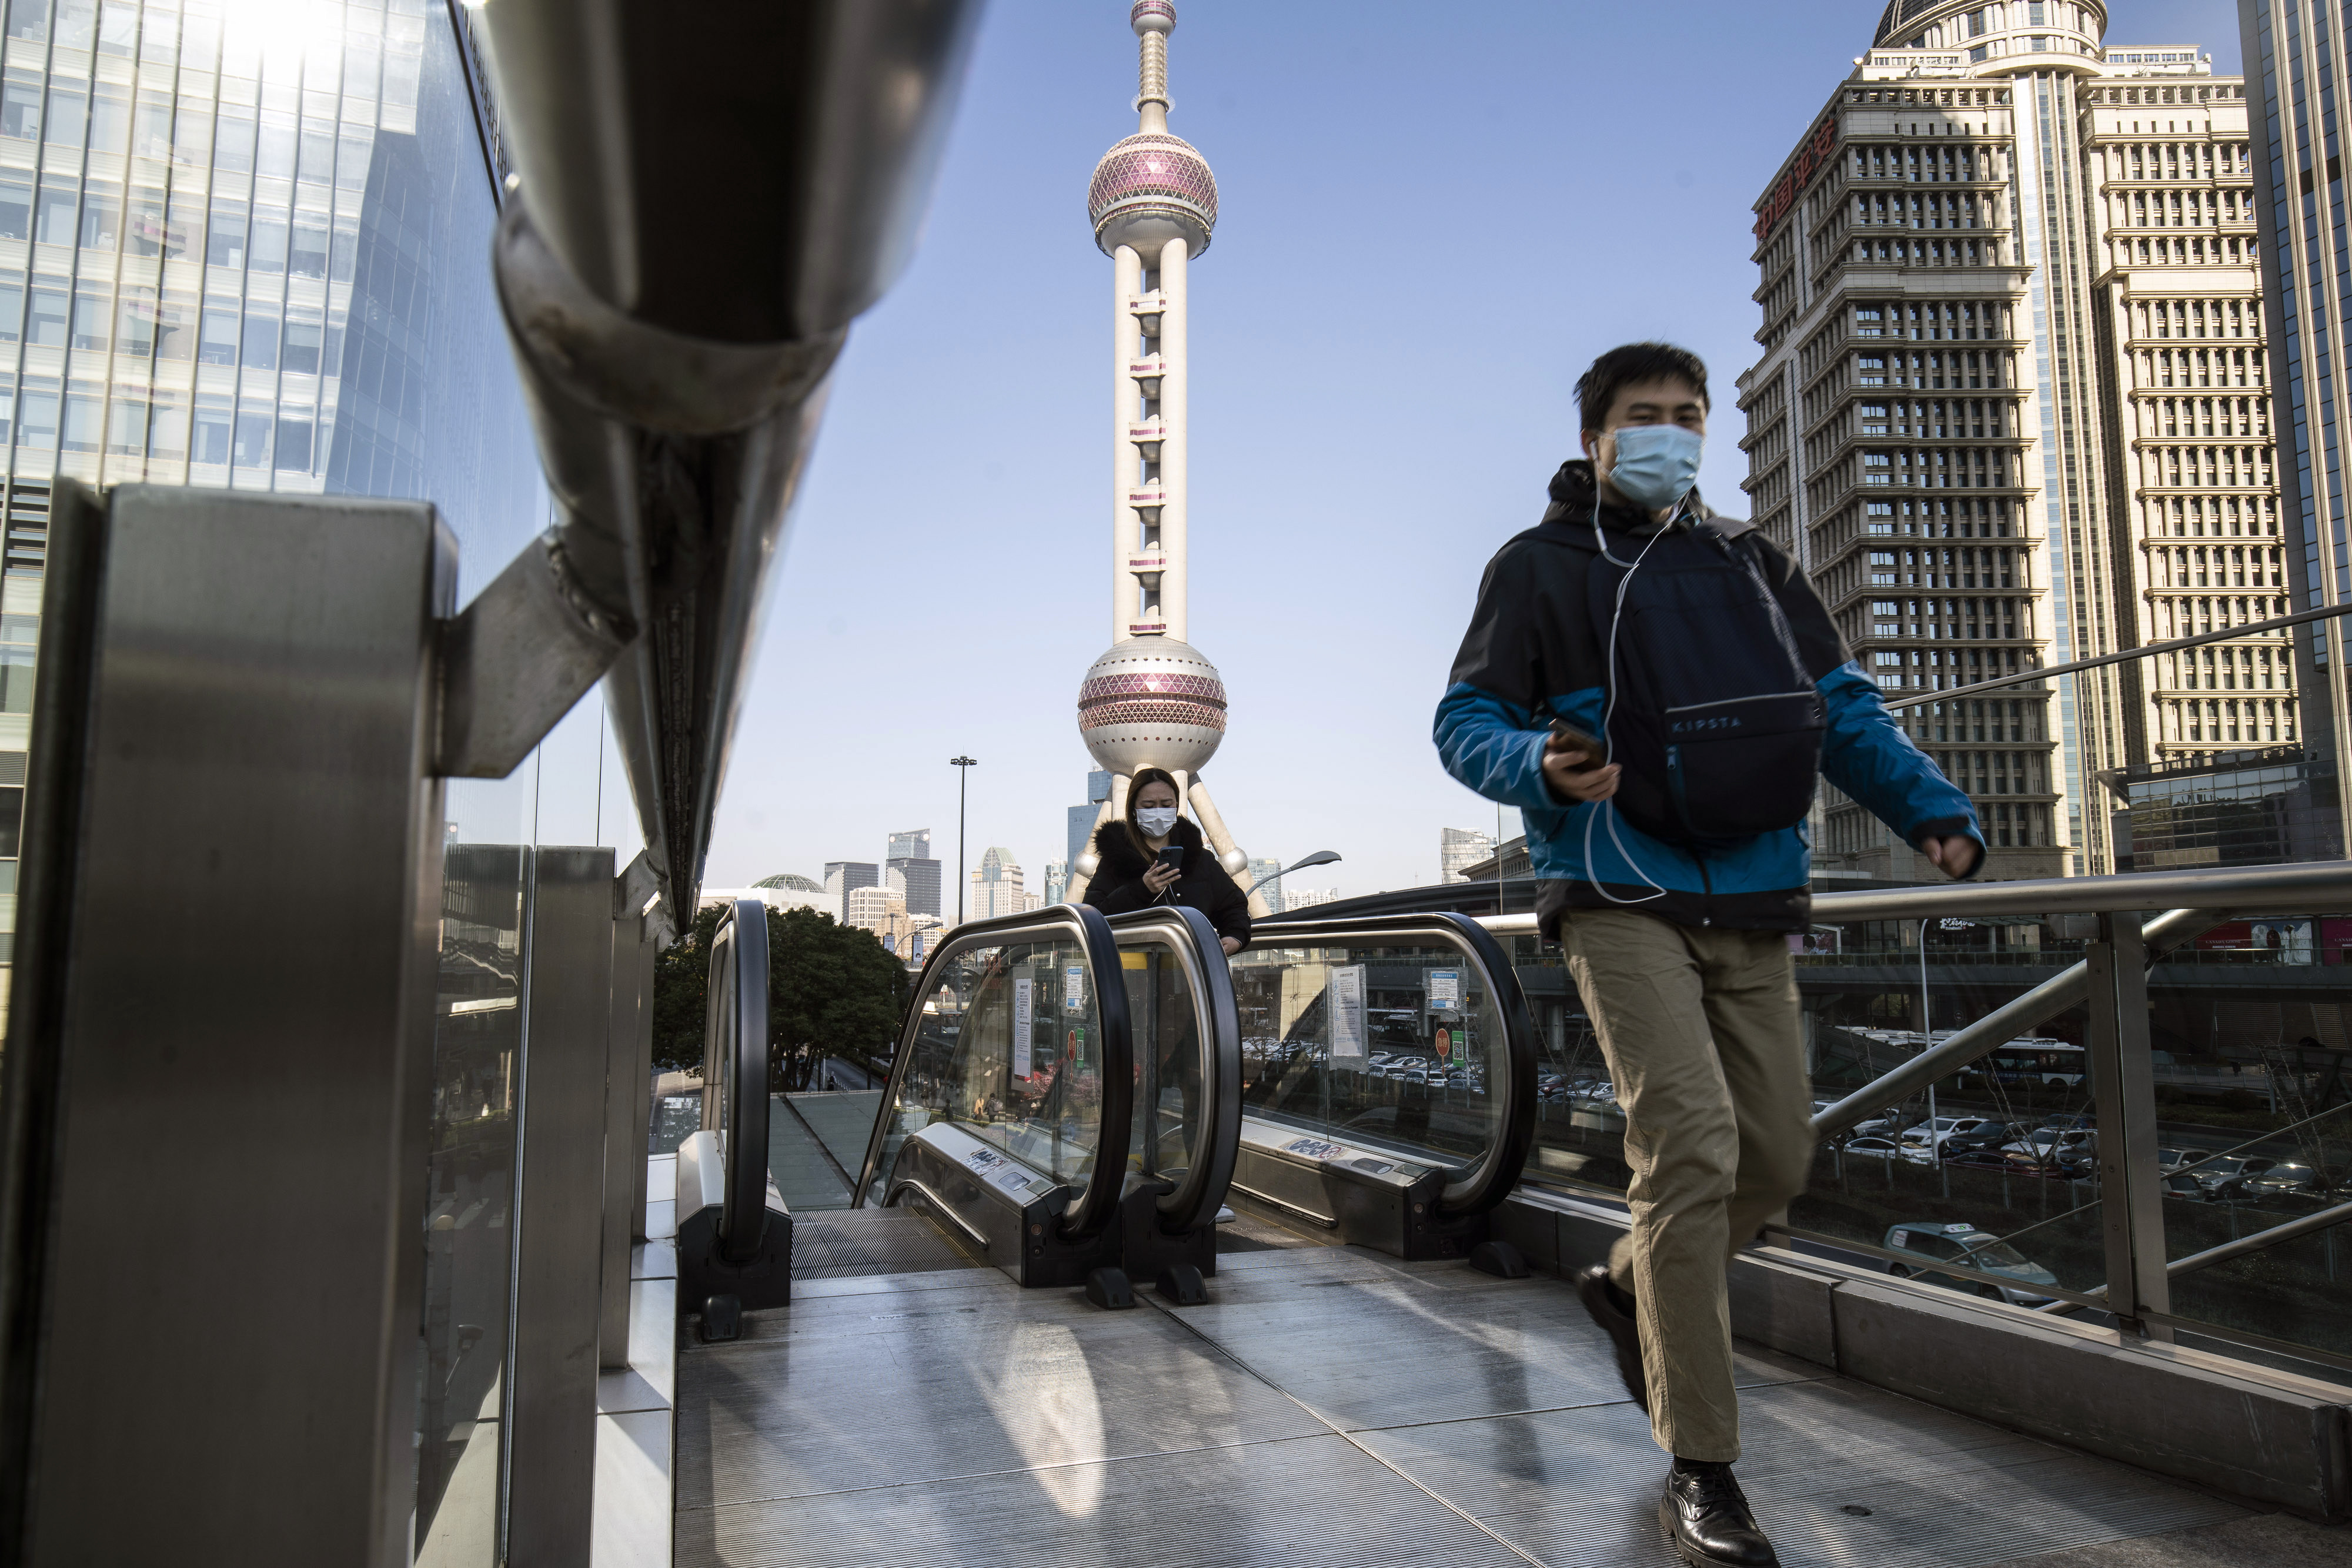 Pedestrians wearing protective masks ride on an escalator in Pudong’s Lujiazui Financial District in Shanghai in February 2021. Photo: Bloomberg